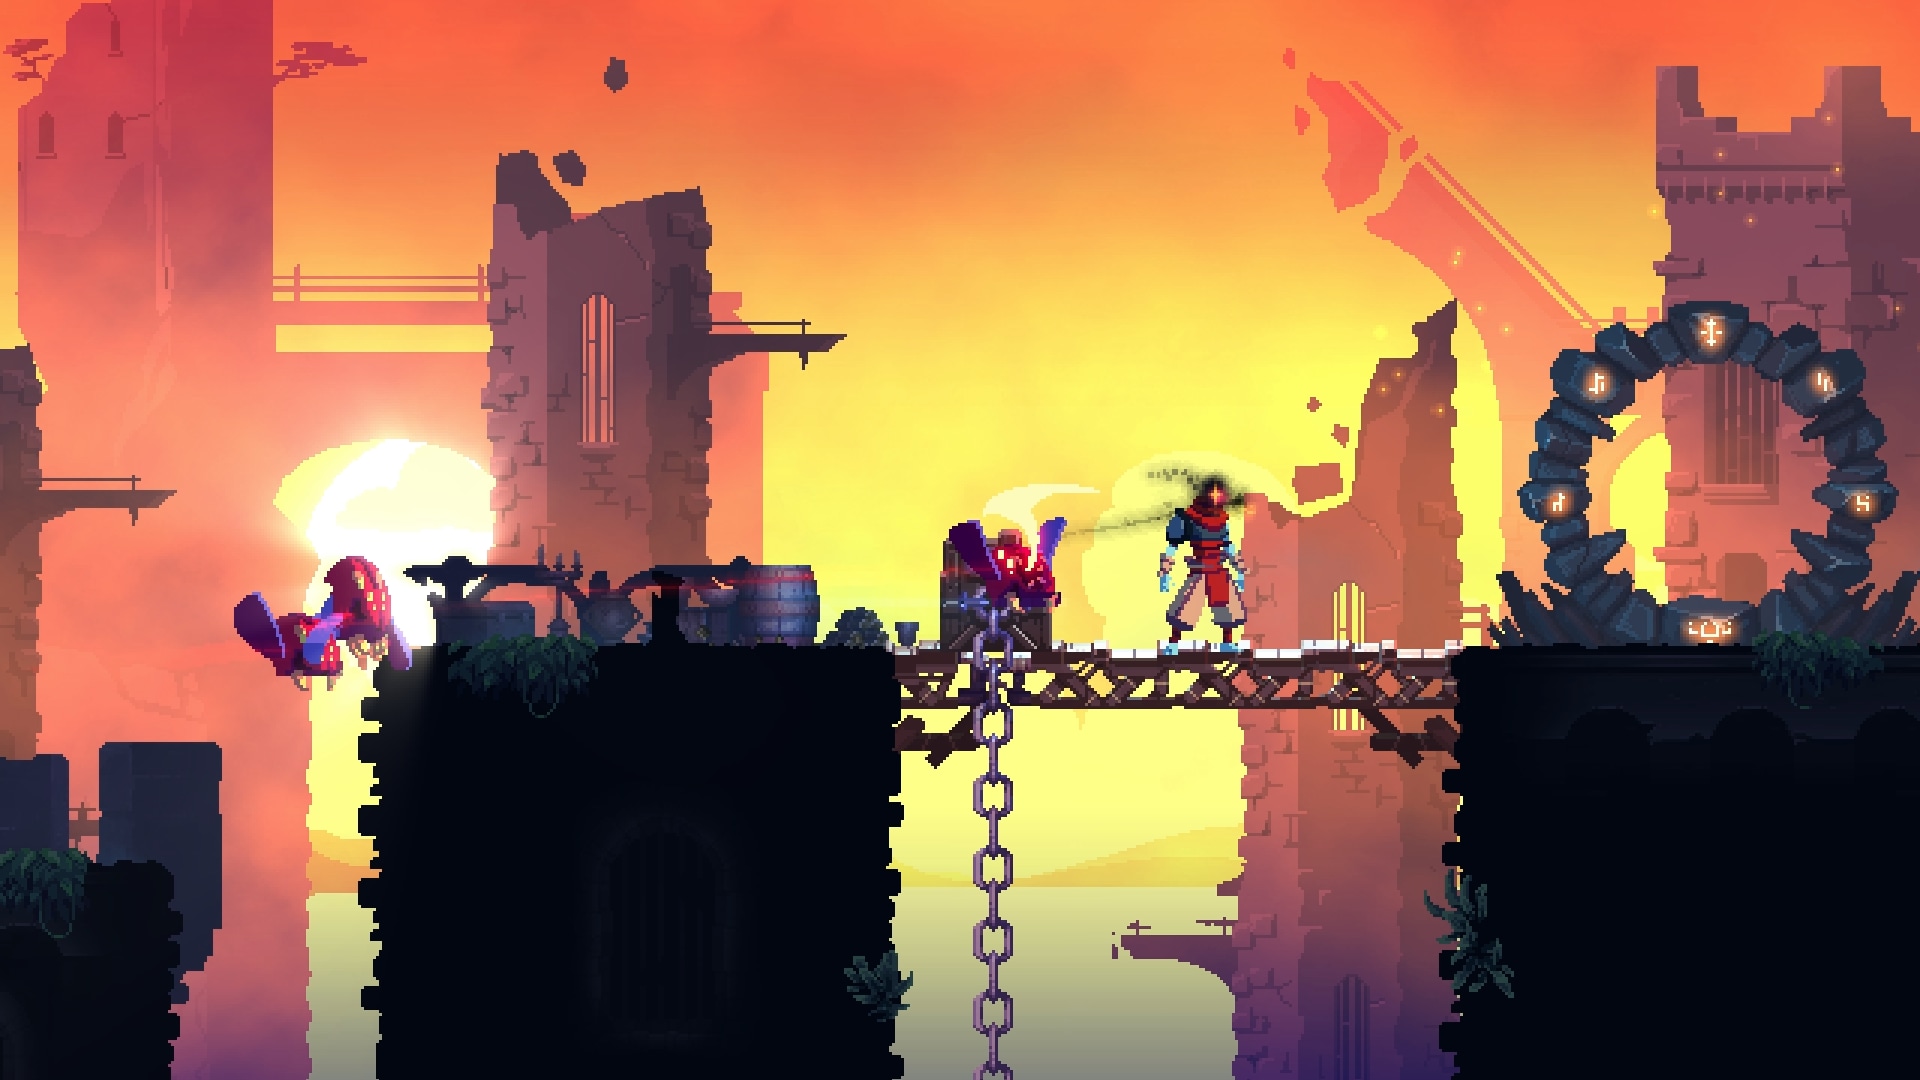 video game, dead cells